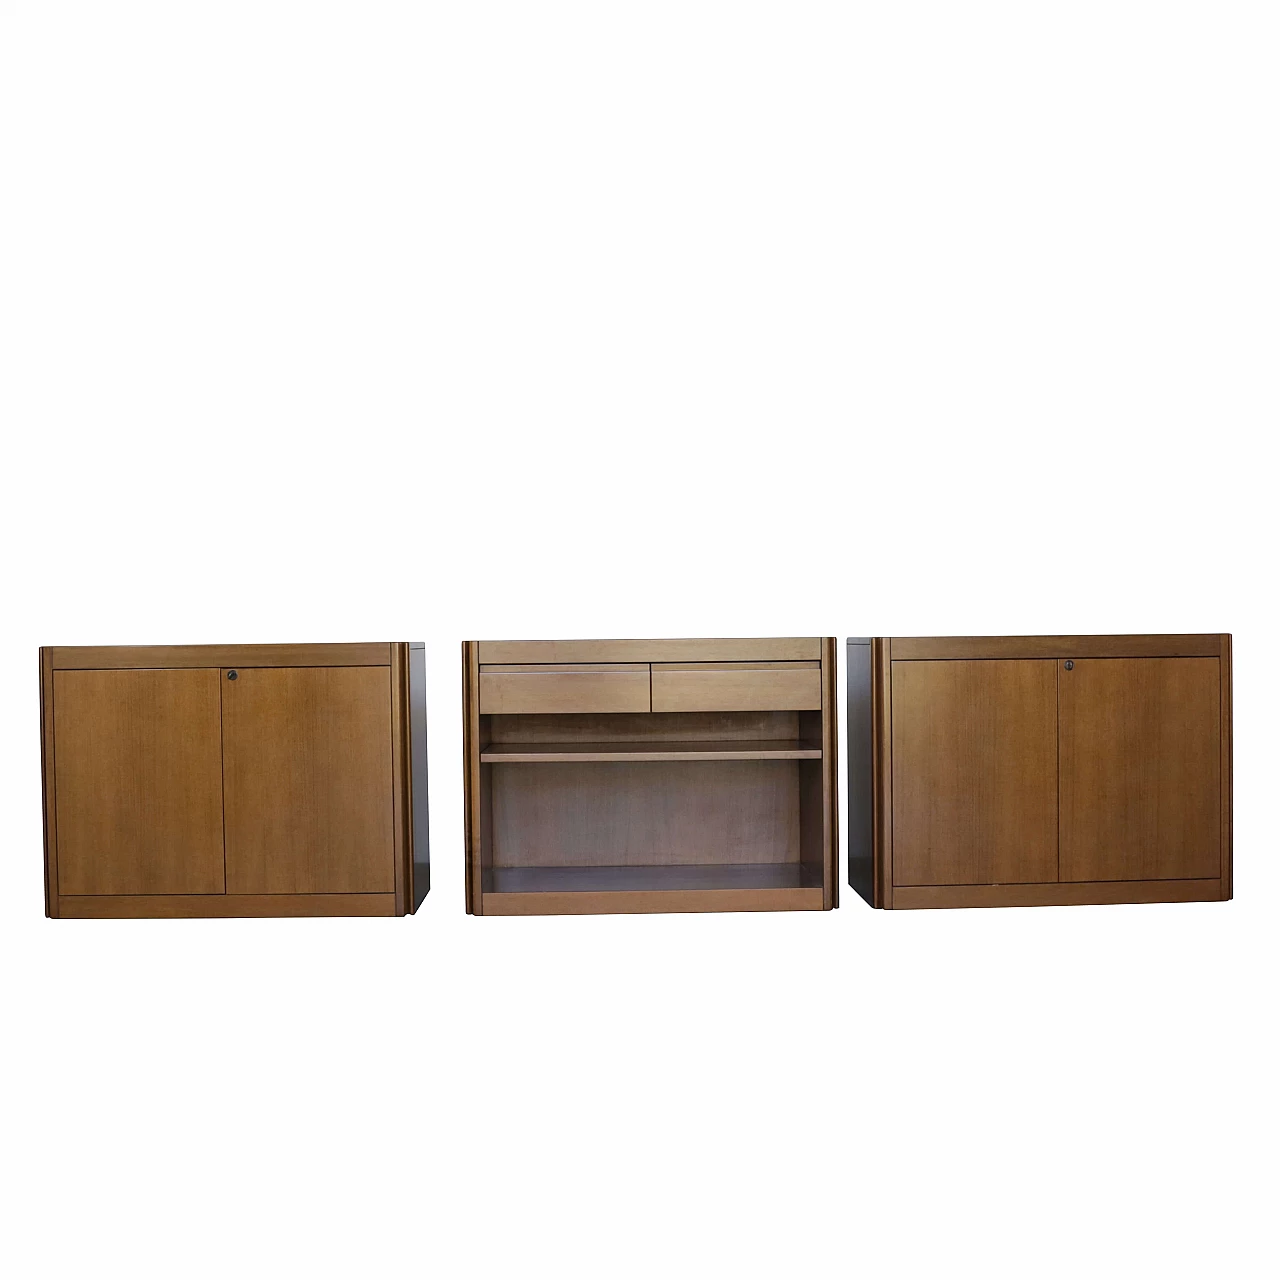 3 Cabinet from the 4D series designed by Mangiarotti for Molteni, 1970s 1268125